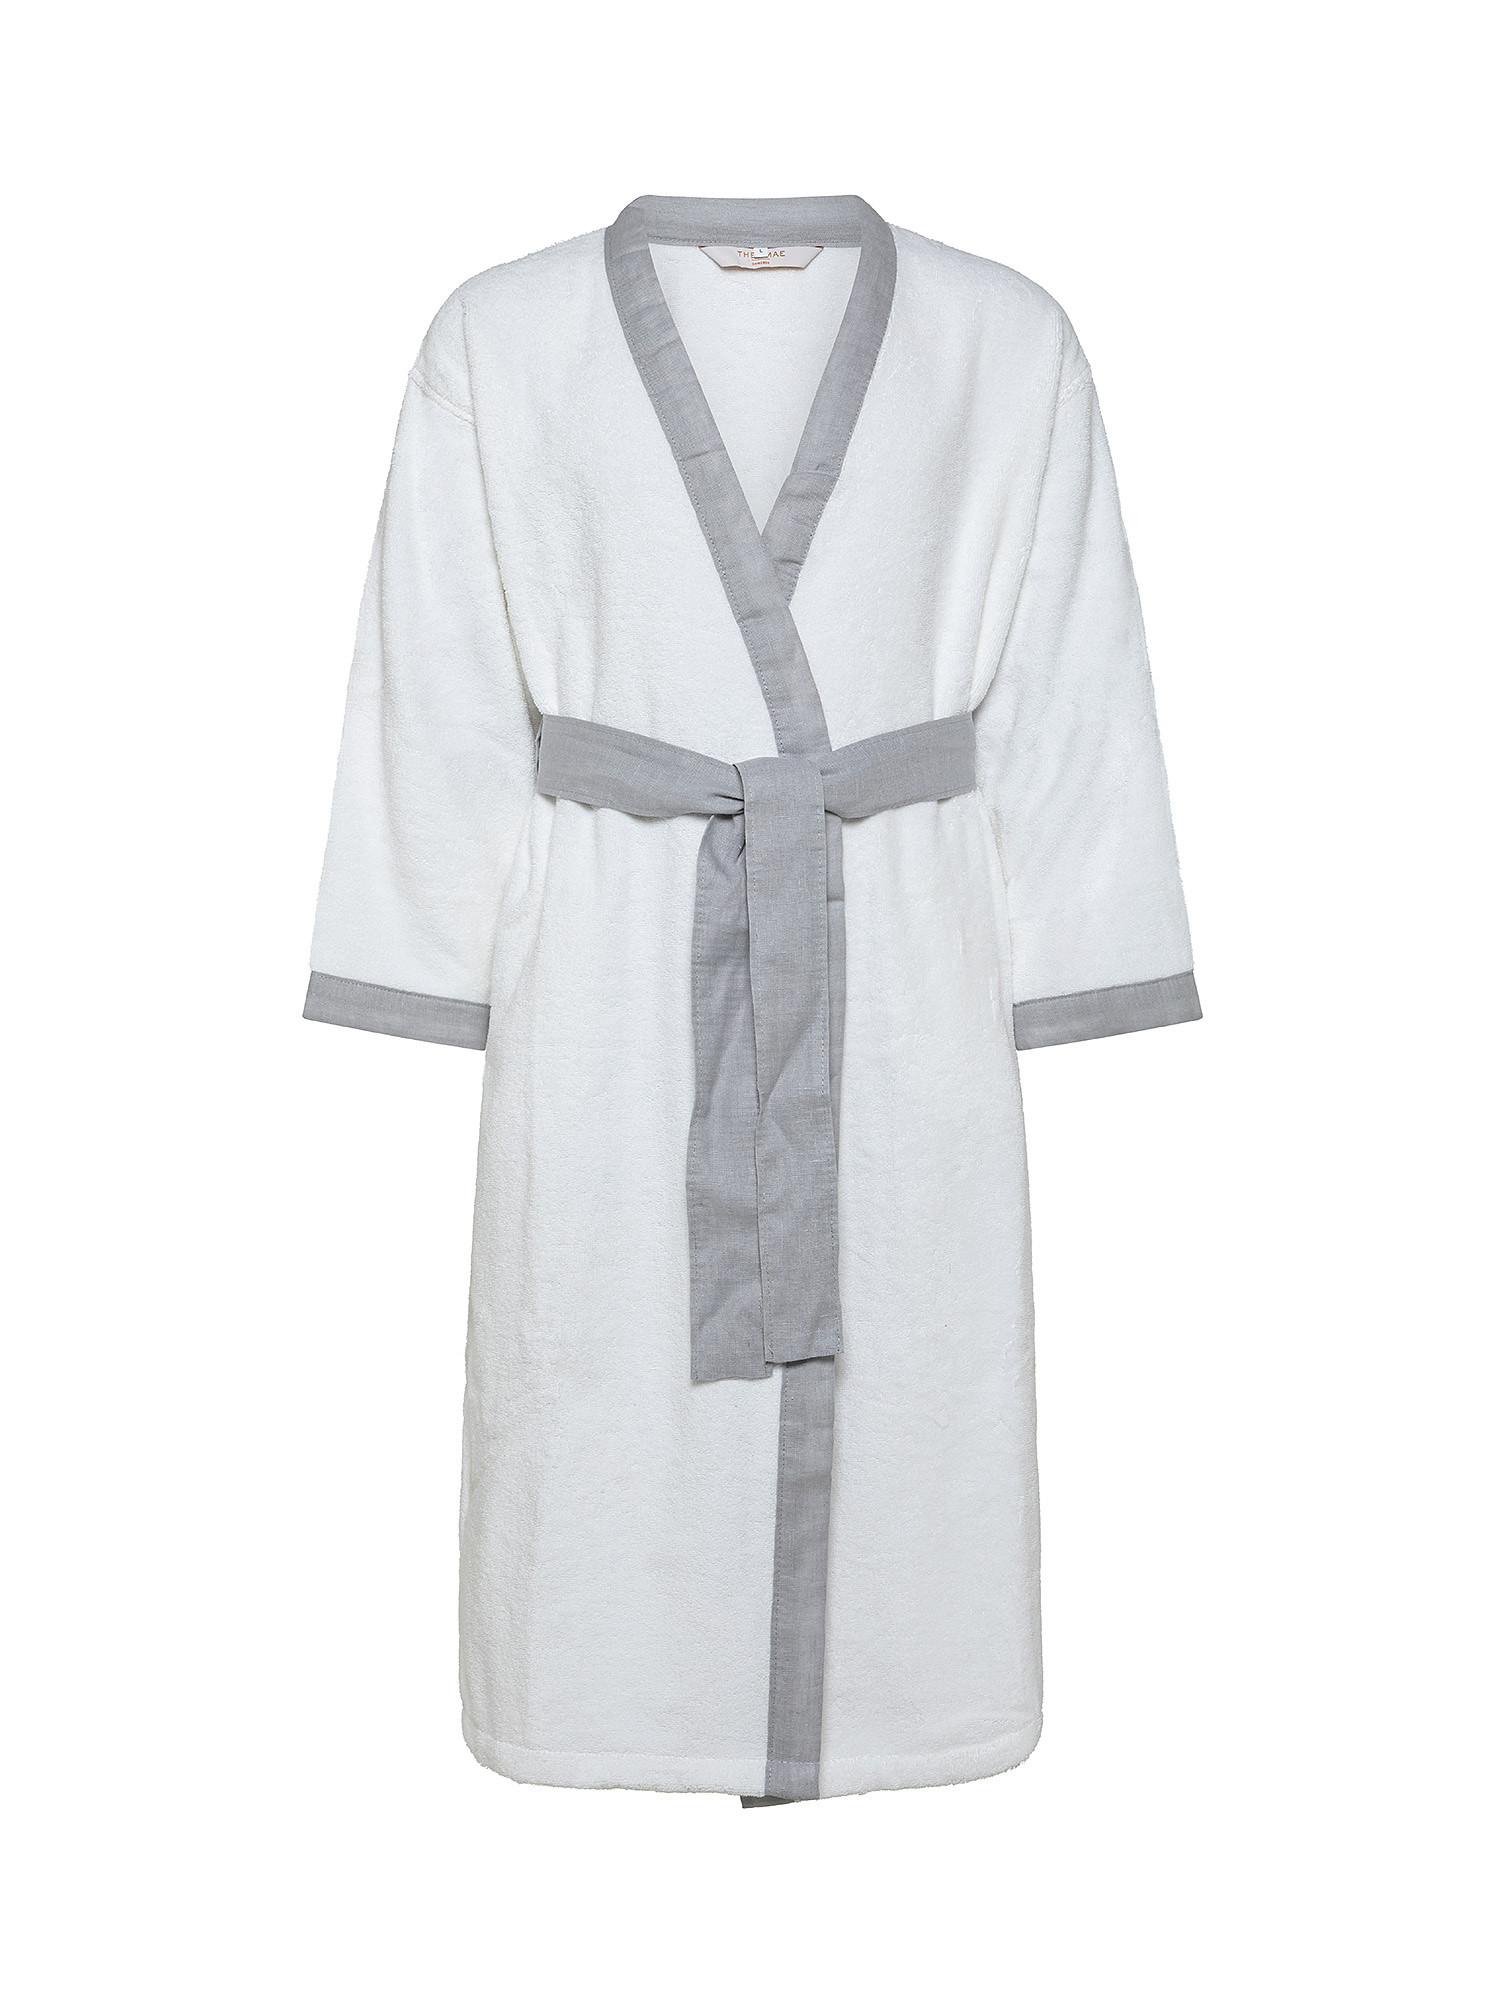 Thermae robe with linen trim, White / Grey, large image number 0